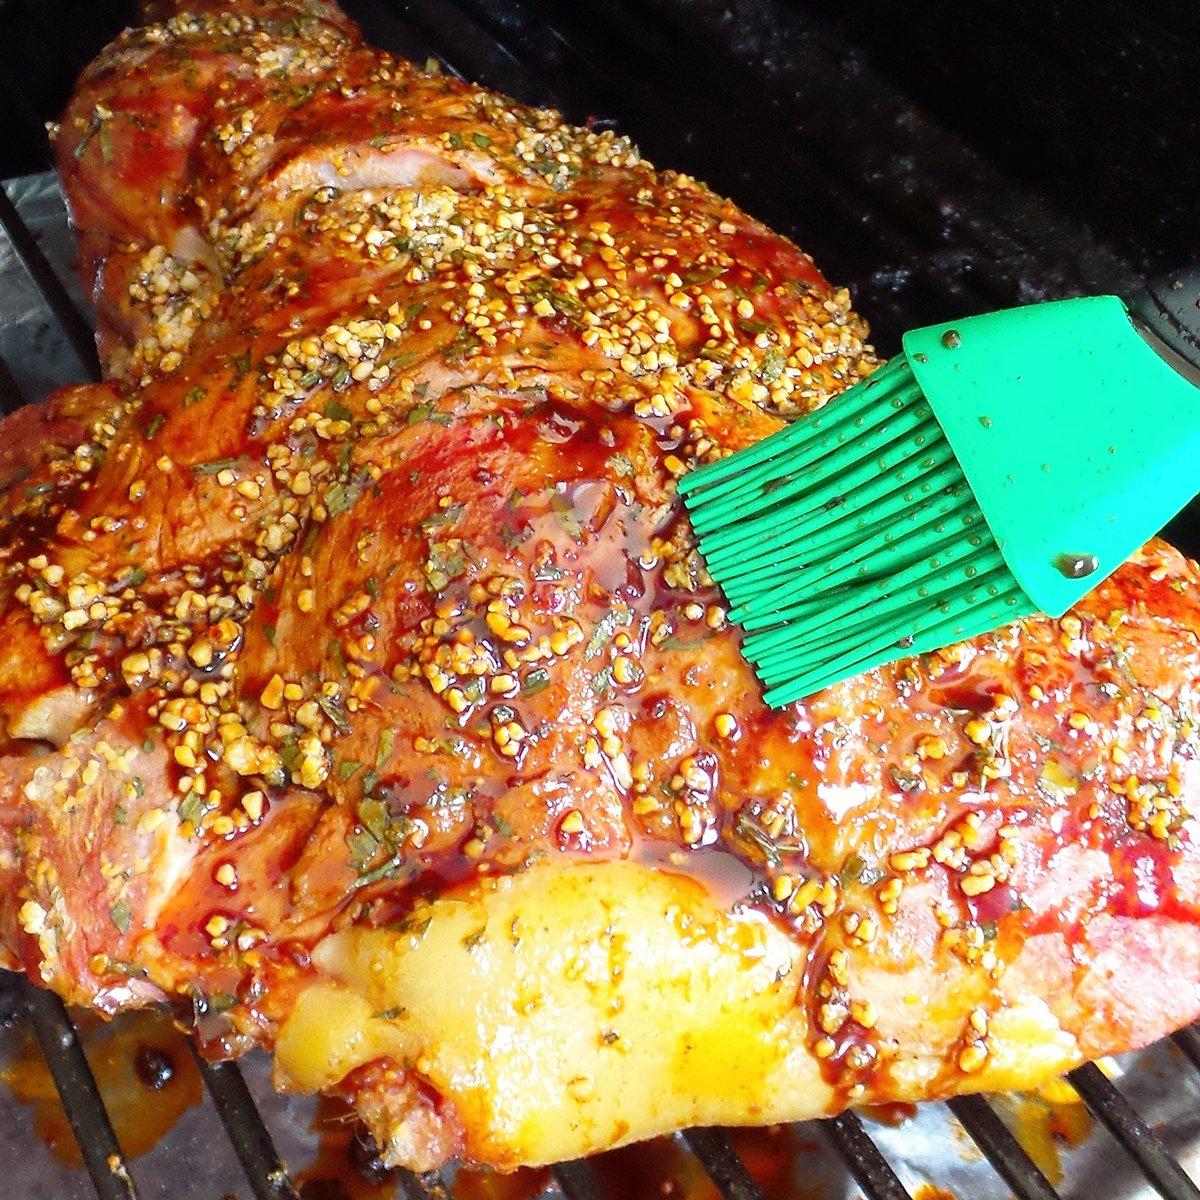 An overnight brine along with regular basting with the mop sauce keeps the ham juicy and flavorful.